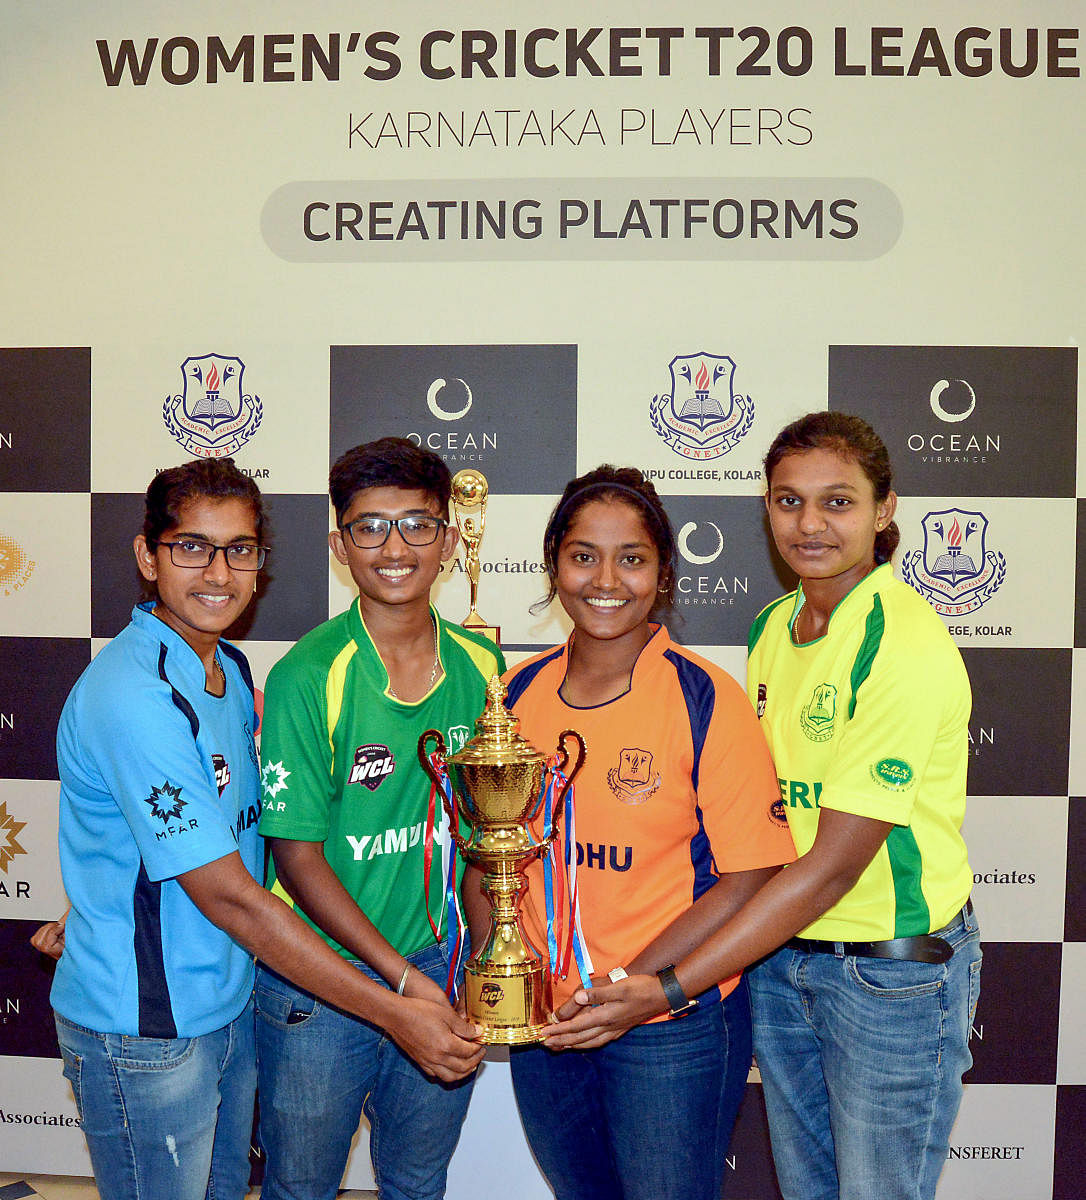 Women's Cricket T20 League players during the unveiling of trophy, at a press conference in Bengaluru. PTI